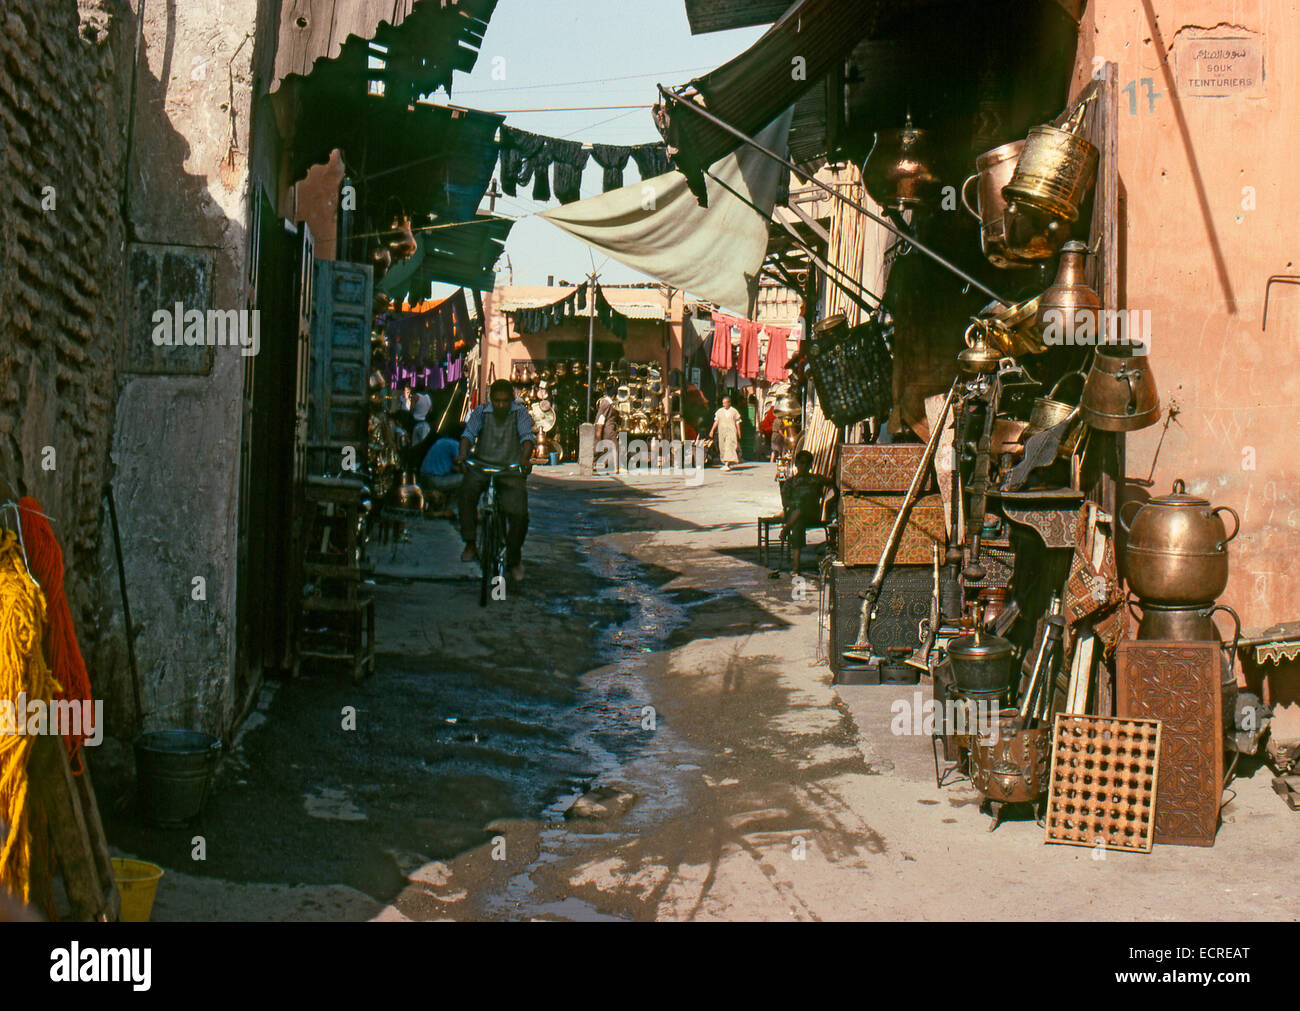 MARRAKECH, MOROCCO – AUGUST, 1979: People walking down a shopping street in the medina of a North African city on August, 1979 i Stock Photo